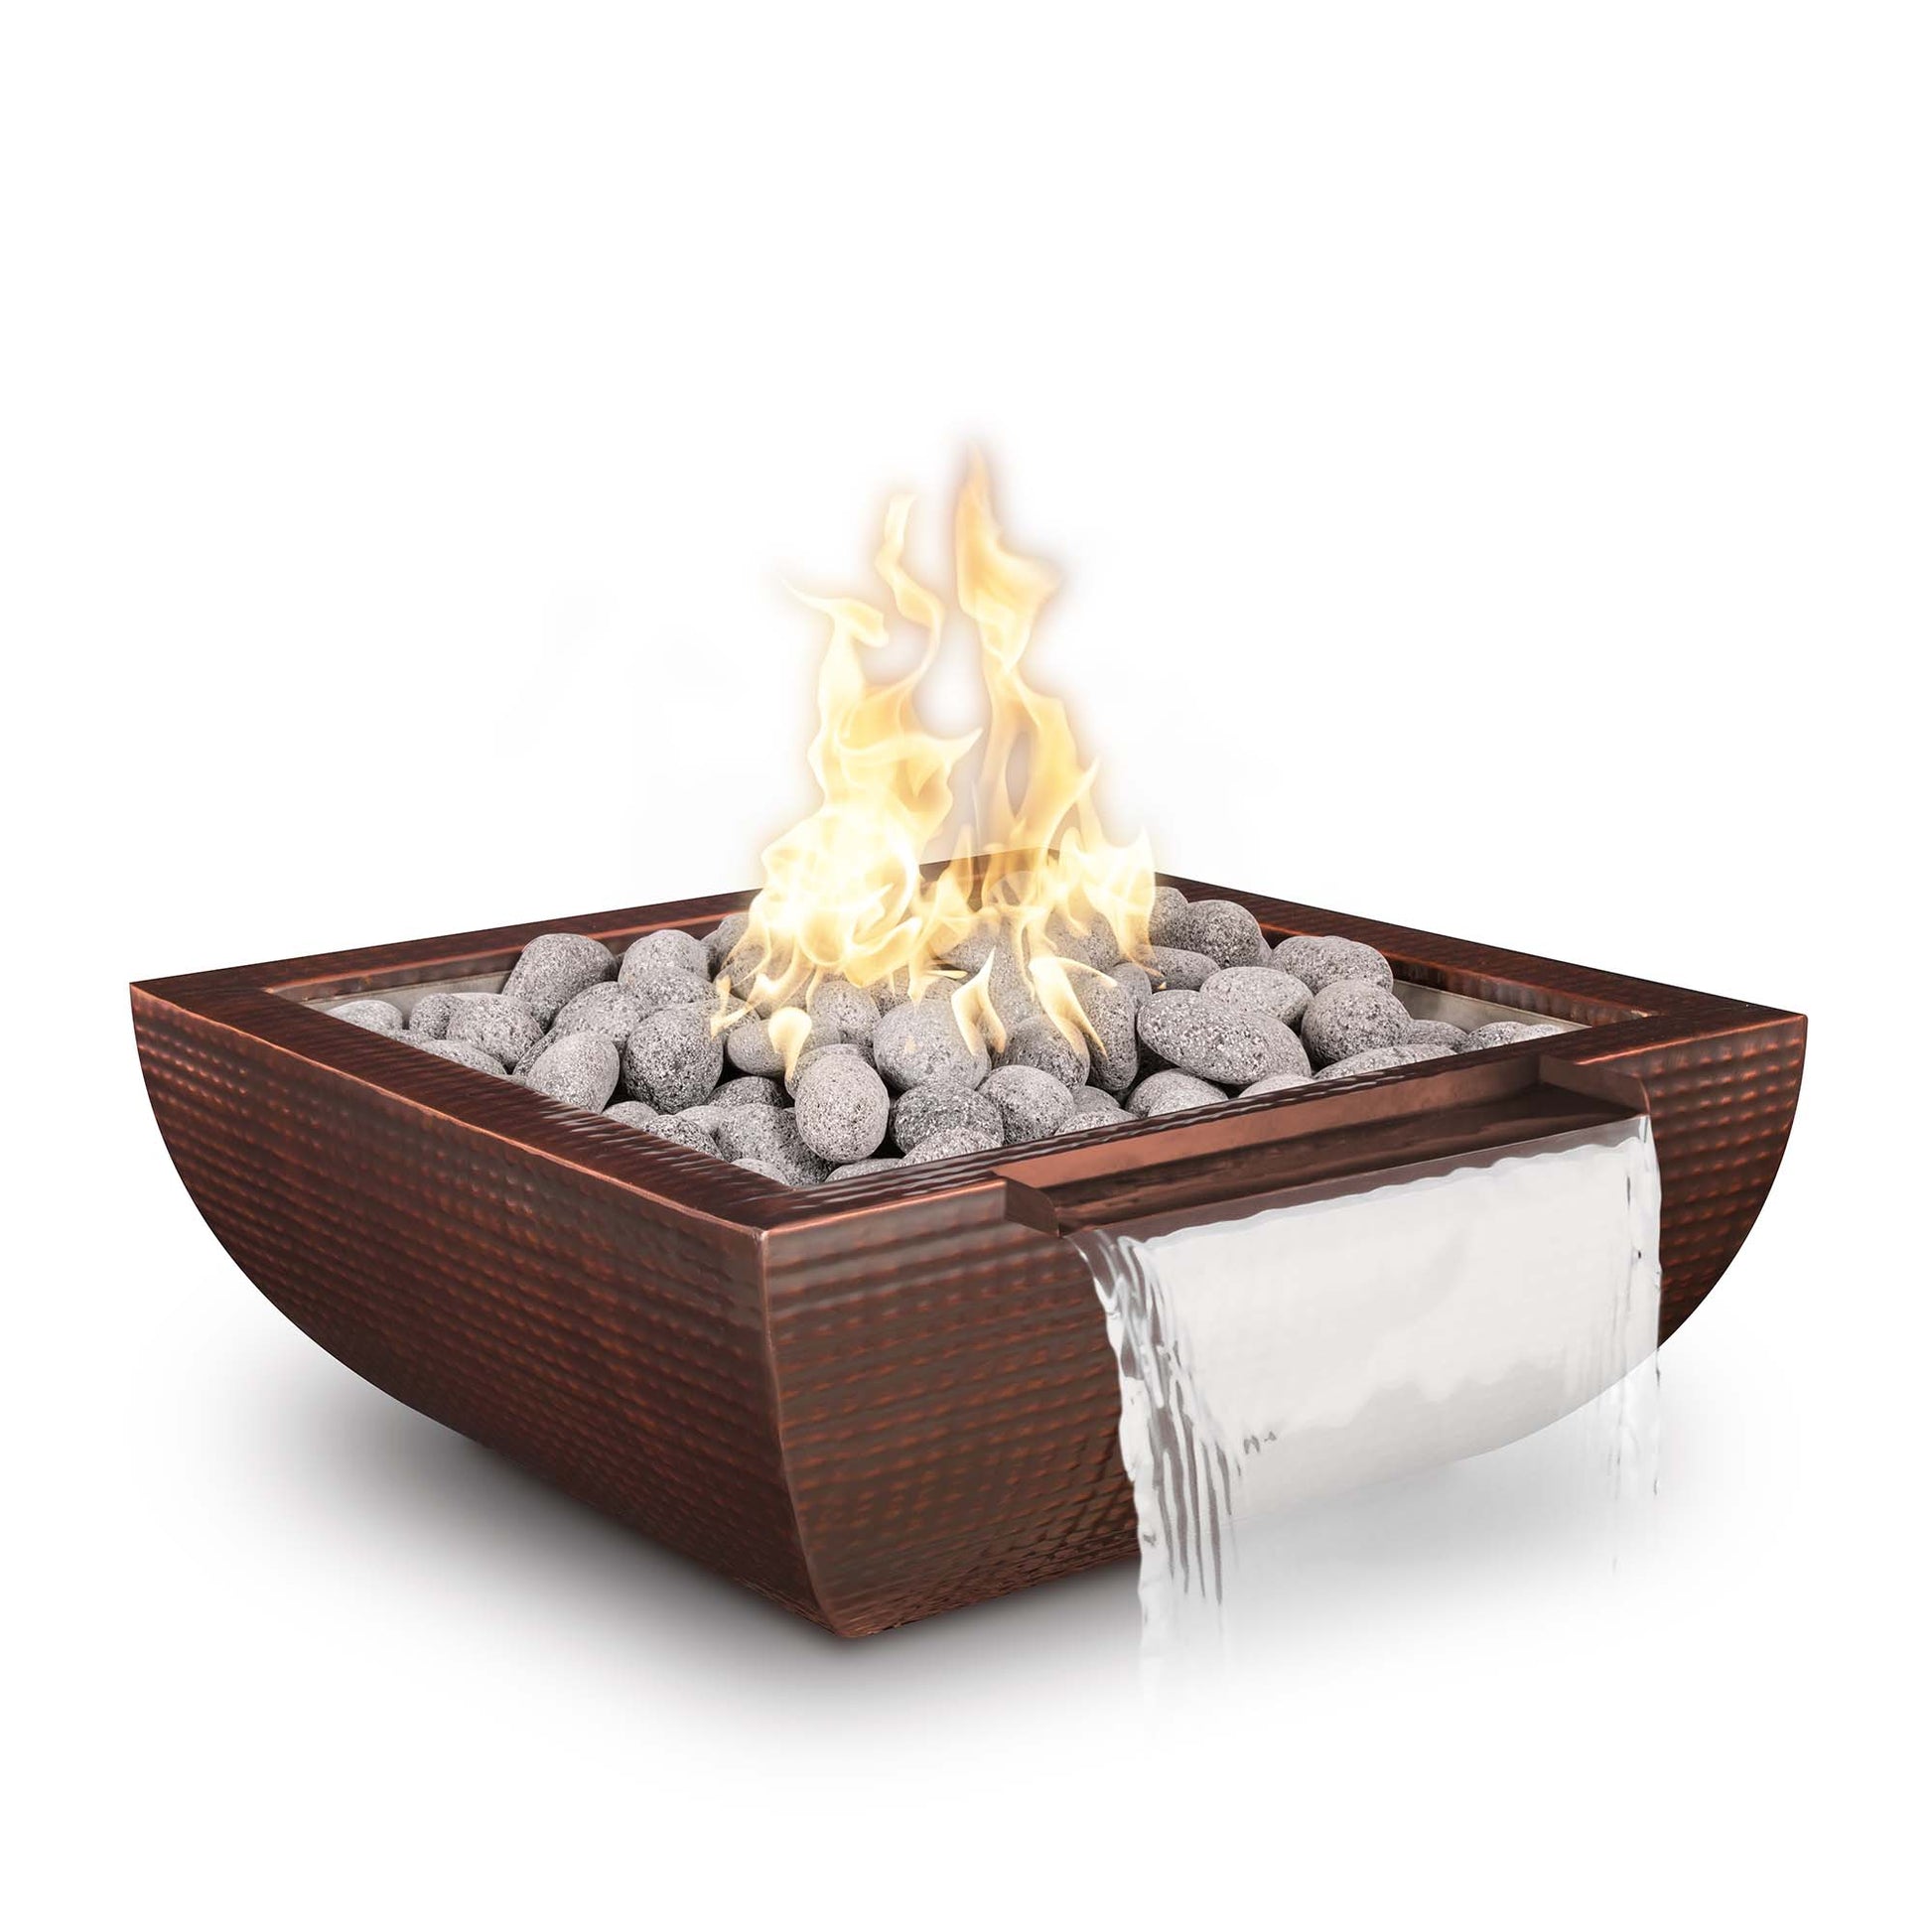 The Outdoor Plus Avalon Wide Spill 24" Black Powder Coated Metal Liquid Propane Fire & Water Bowl with Match Lit Ignition